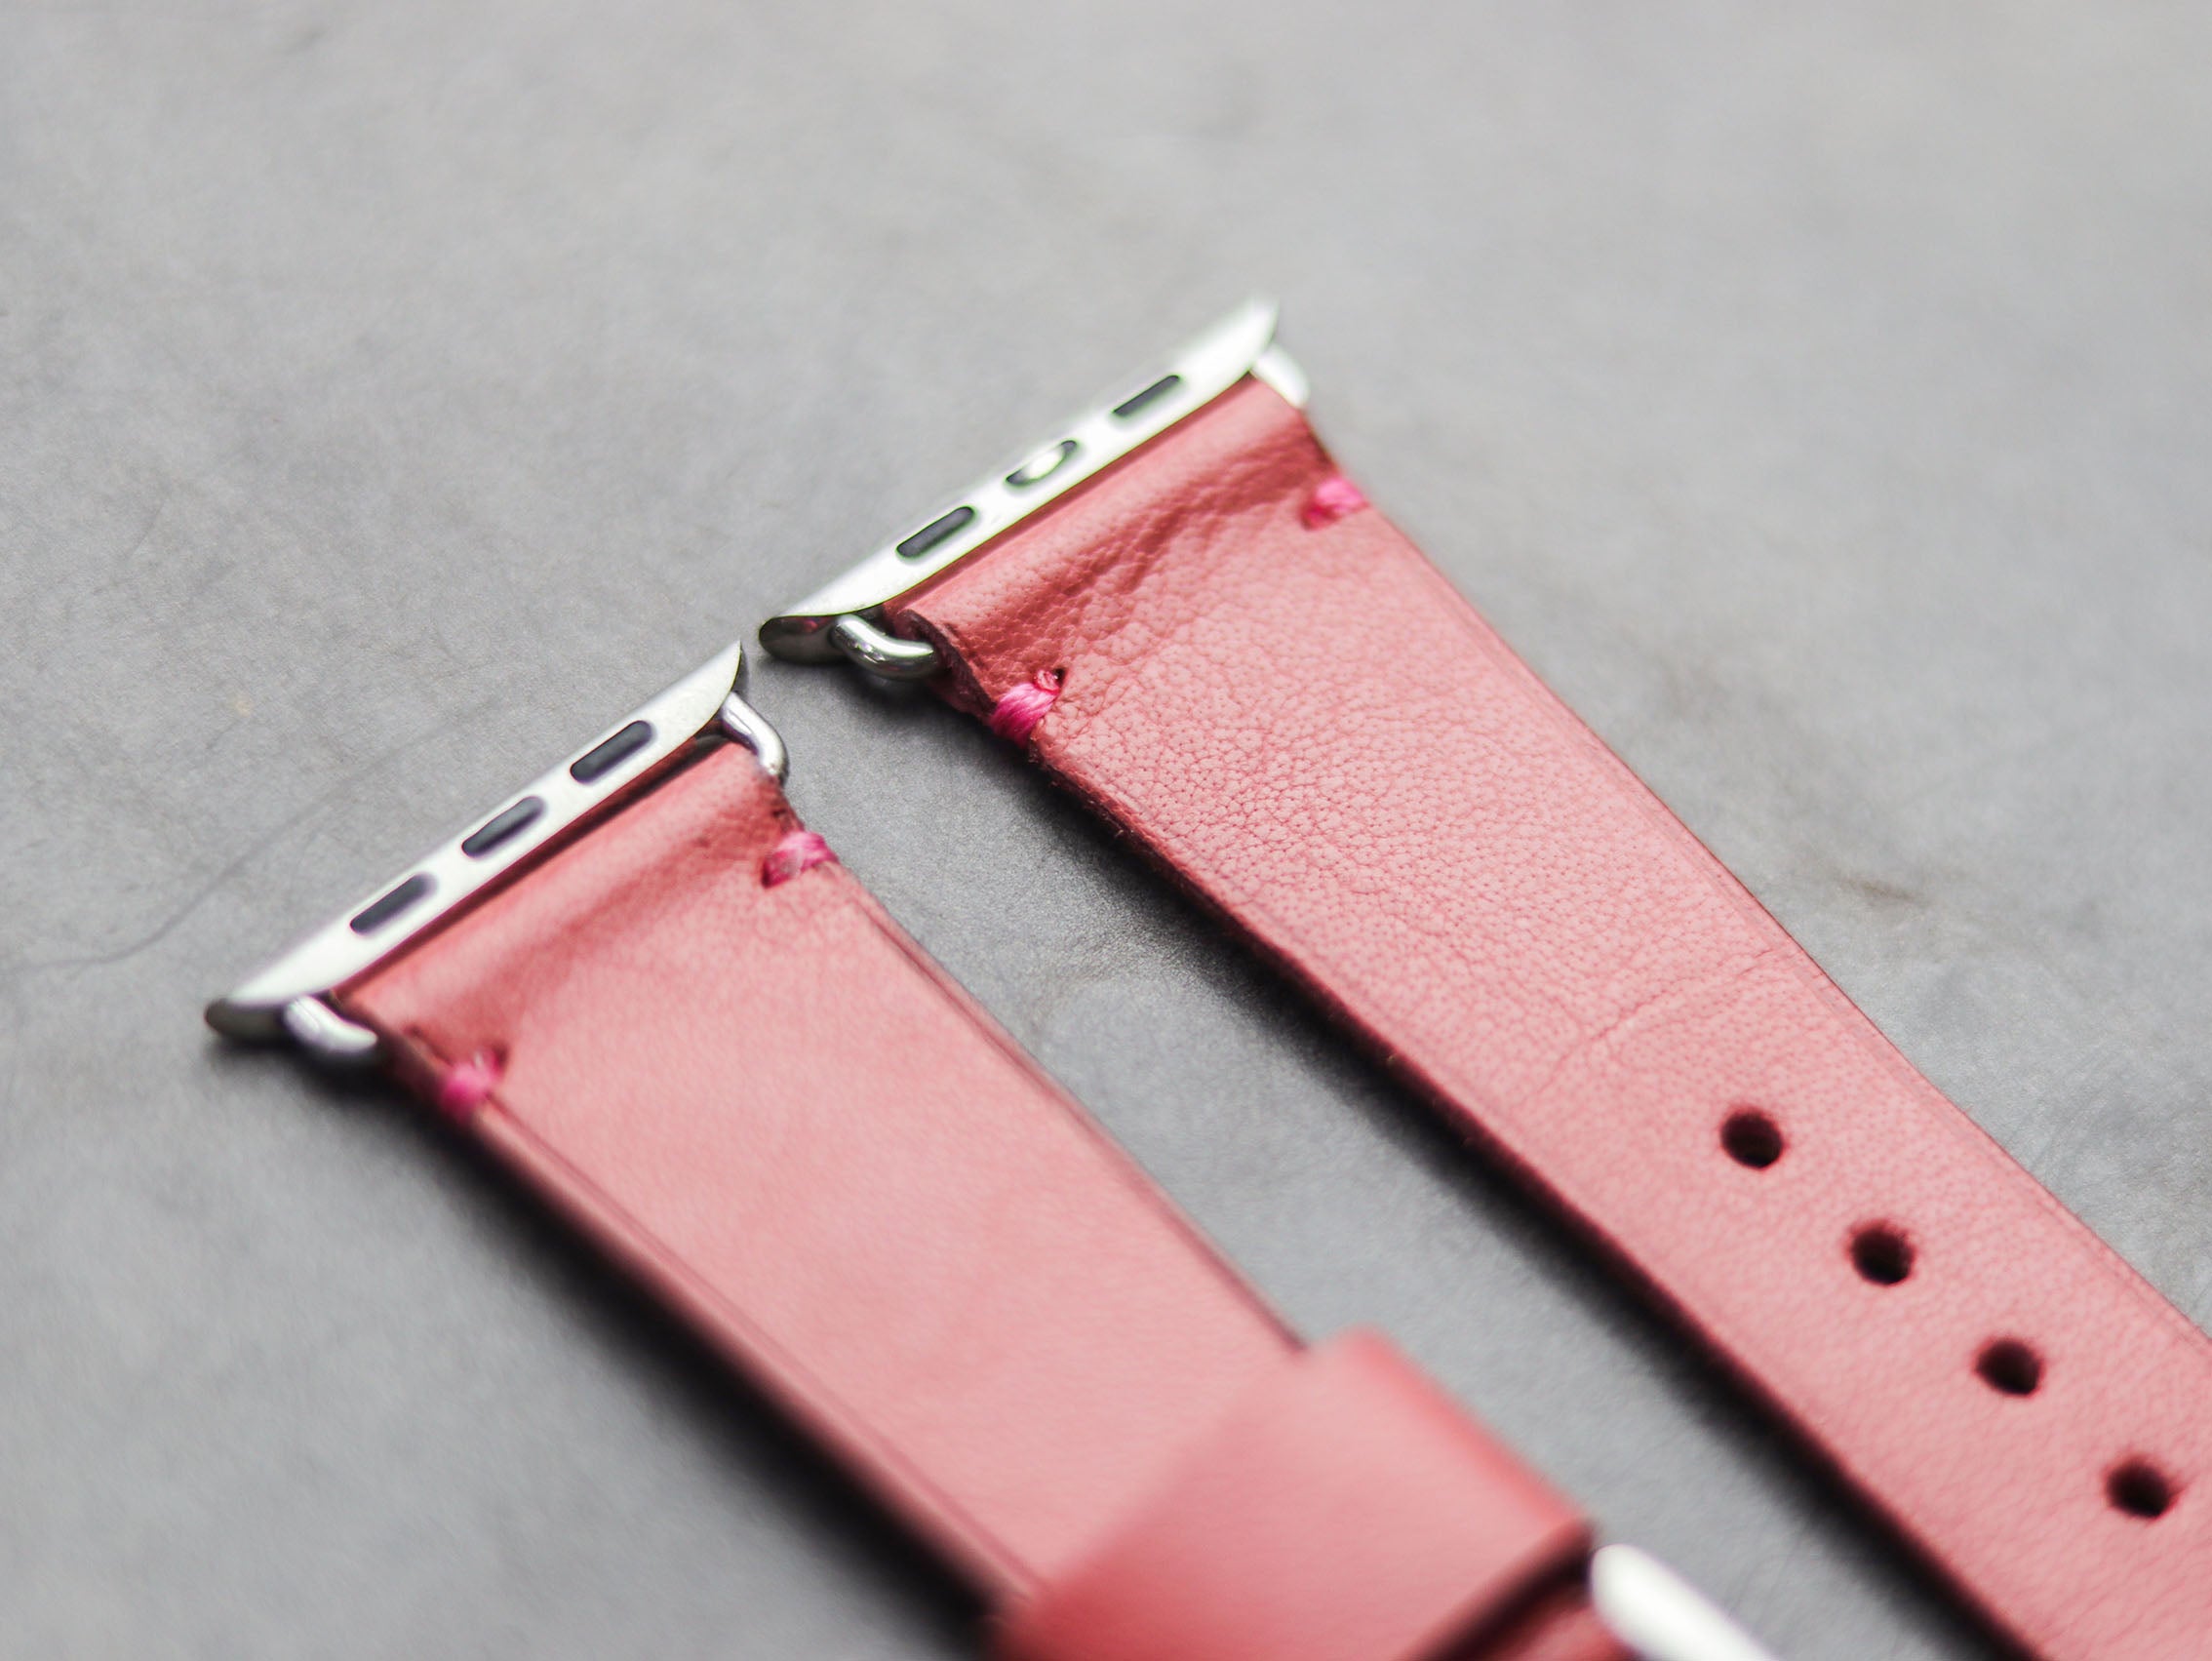 FLAMINGO PINK MINIMAL STITCHED HAND-CRAFTED APPLE WATCH STRAPS